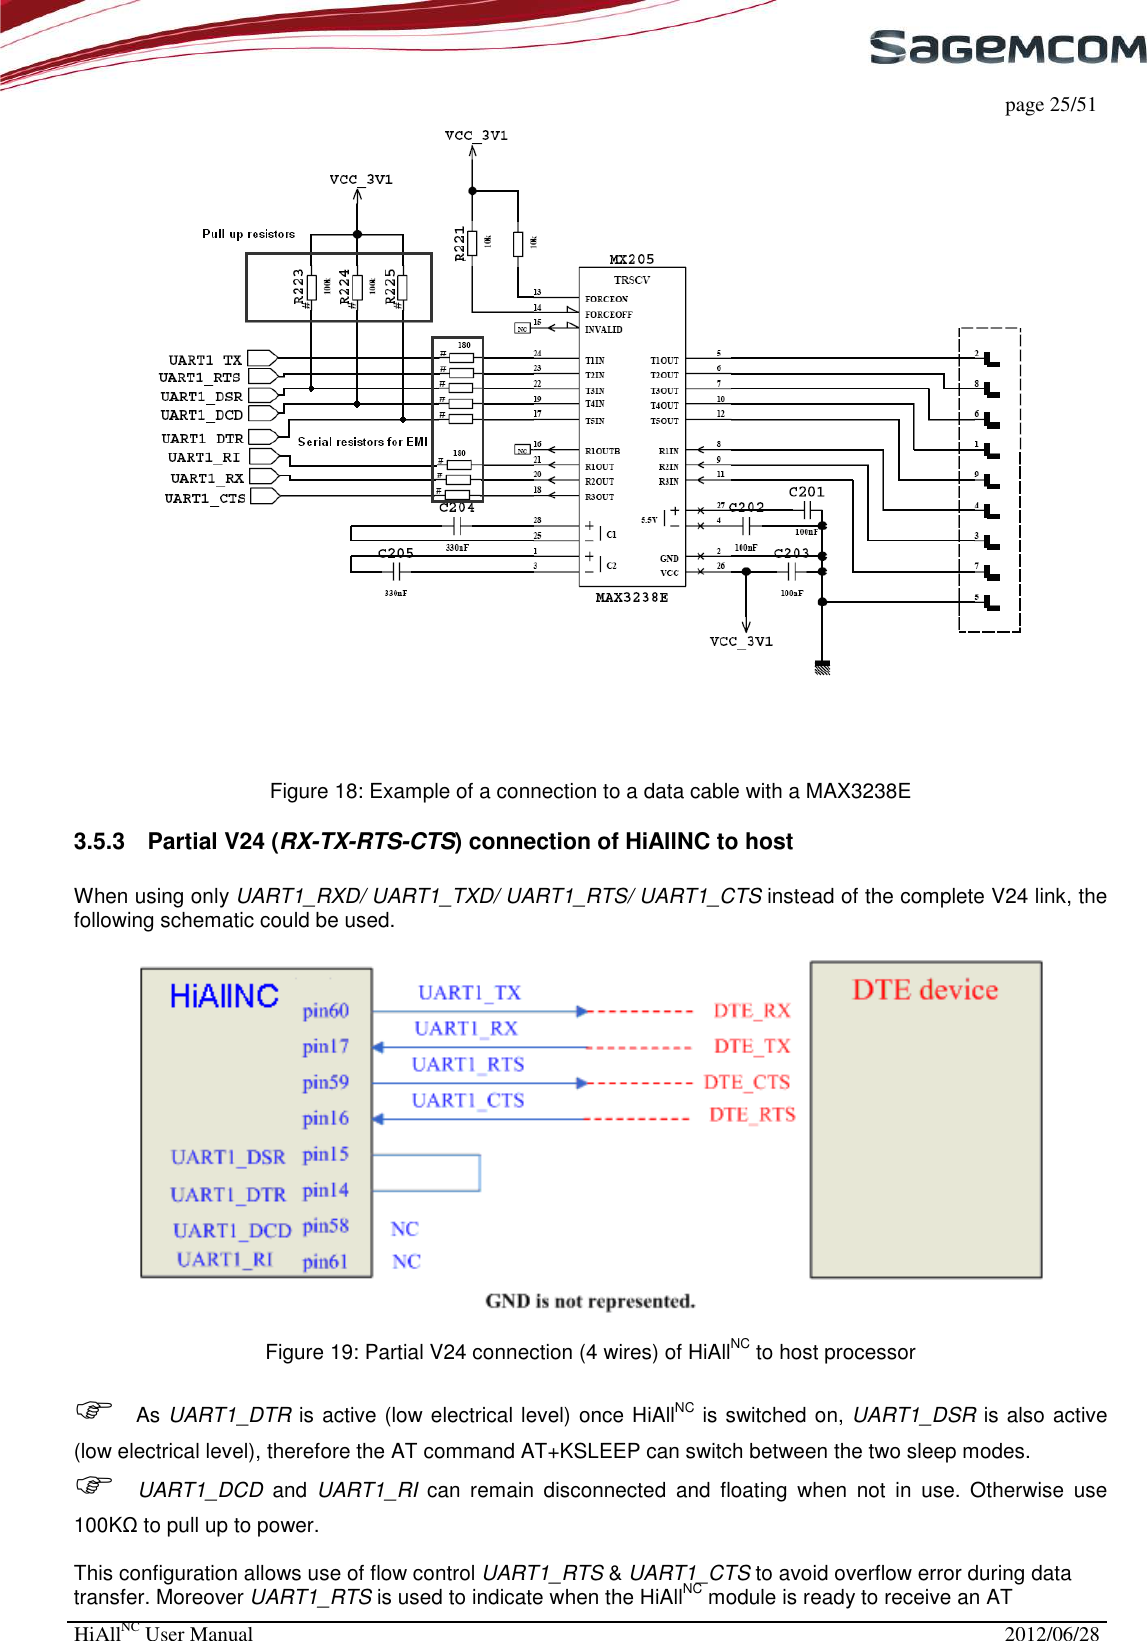     page 25/51 HiAllNC User Manual  2012/06/28   Figure 18: Example of a connection to a data cable with a MAX3238E  3.5.3  Partial V24 (RX-TX-RTS-CTS) connection of HiAllNC to host  When using only UART1_RXD/ UART1_TXD/ UART1_RTS/ UART1_CTS instead of the complete V24 link, the following schematic could be used.    Figure 19: Partial V24 connection (4 wires) of HiAllNC to host processor    As UART1_DTR is active (low electrical level) once HiAllNC is switched on, UART1_DSR is also active (low electrical level), therefore the AT command AT+KSLEEP can switch between the two sleep modes.  UART1_DCD  and  UART1_RI  can  remain  disconnected  and  floating  when  not  in  use.  Otherwise  use 100KΩ to pull up to power.  This configuration allows use of flow control UART1_RTS &amp; UART1_CTS to avoid overflow error during data transfer. Moreover UART1_RTS is used to indicate when the HiAllNC module is ready to receive an AT 